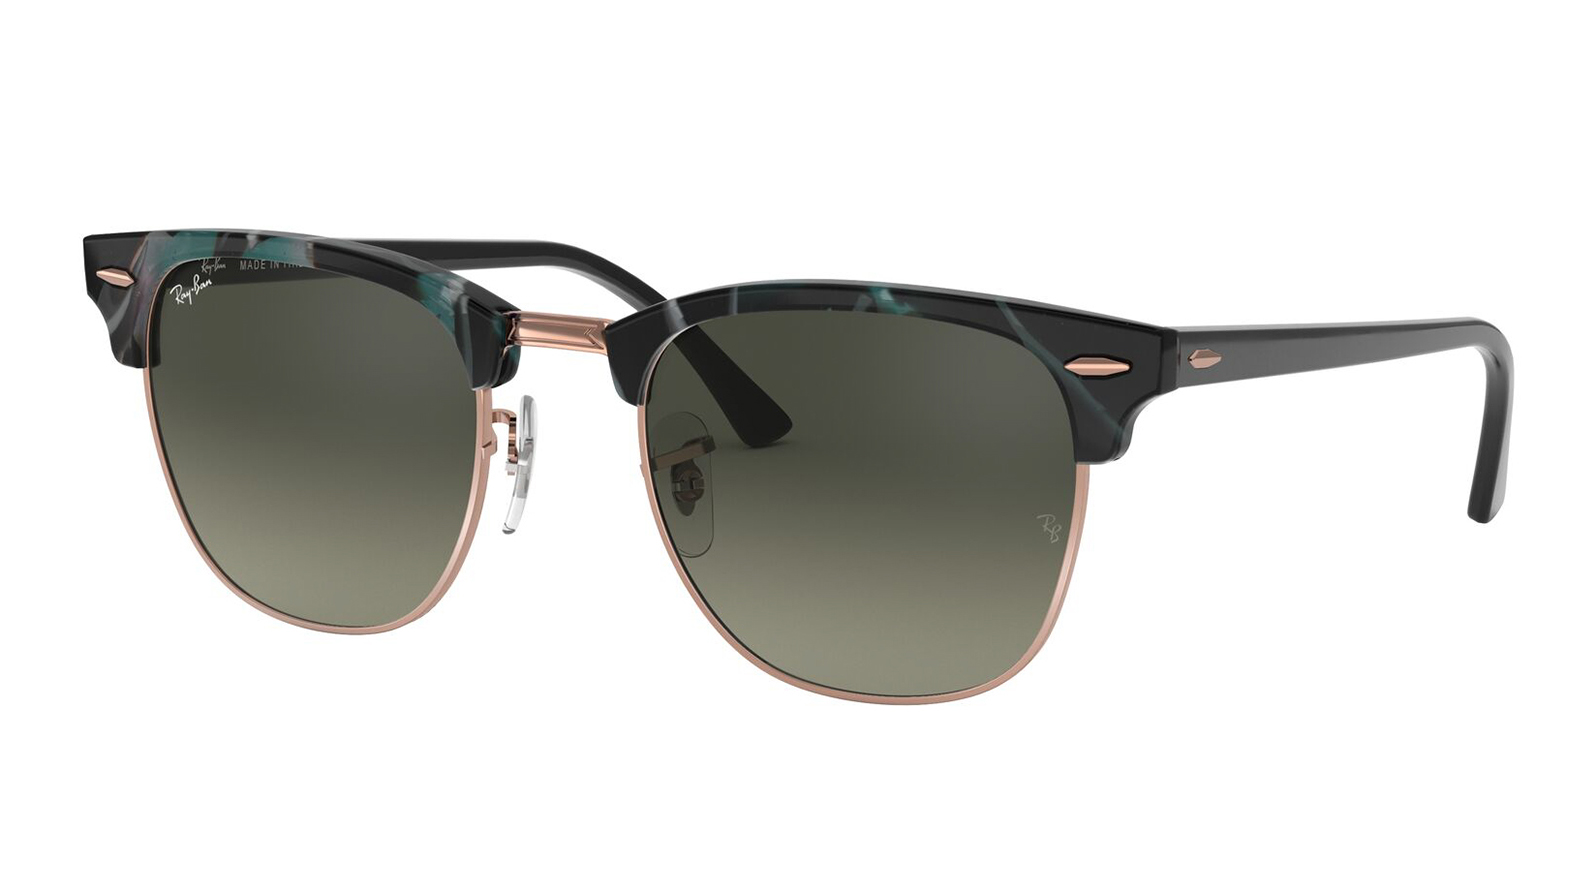 Ray-Ban Clubmaster RB 3016 125571 ray ban clubmaster rx 5154 5884